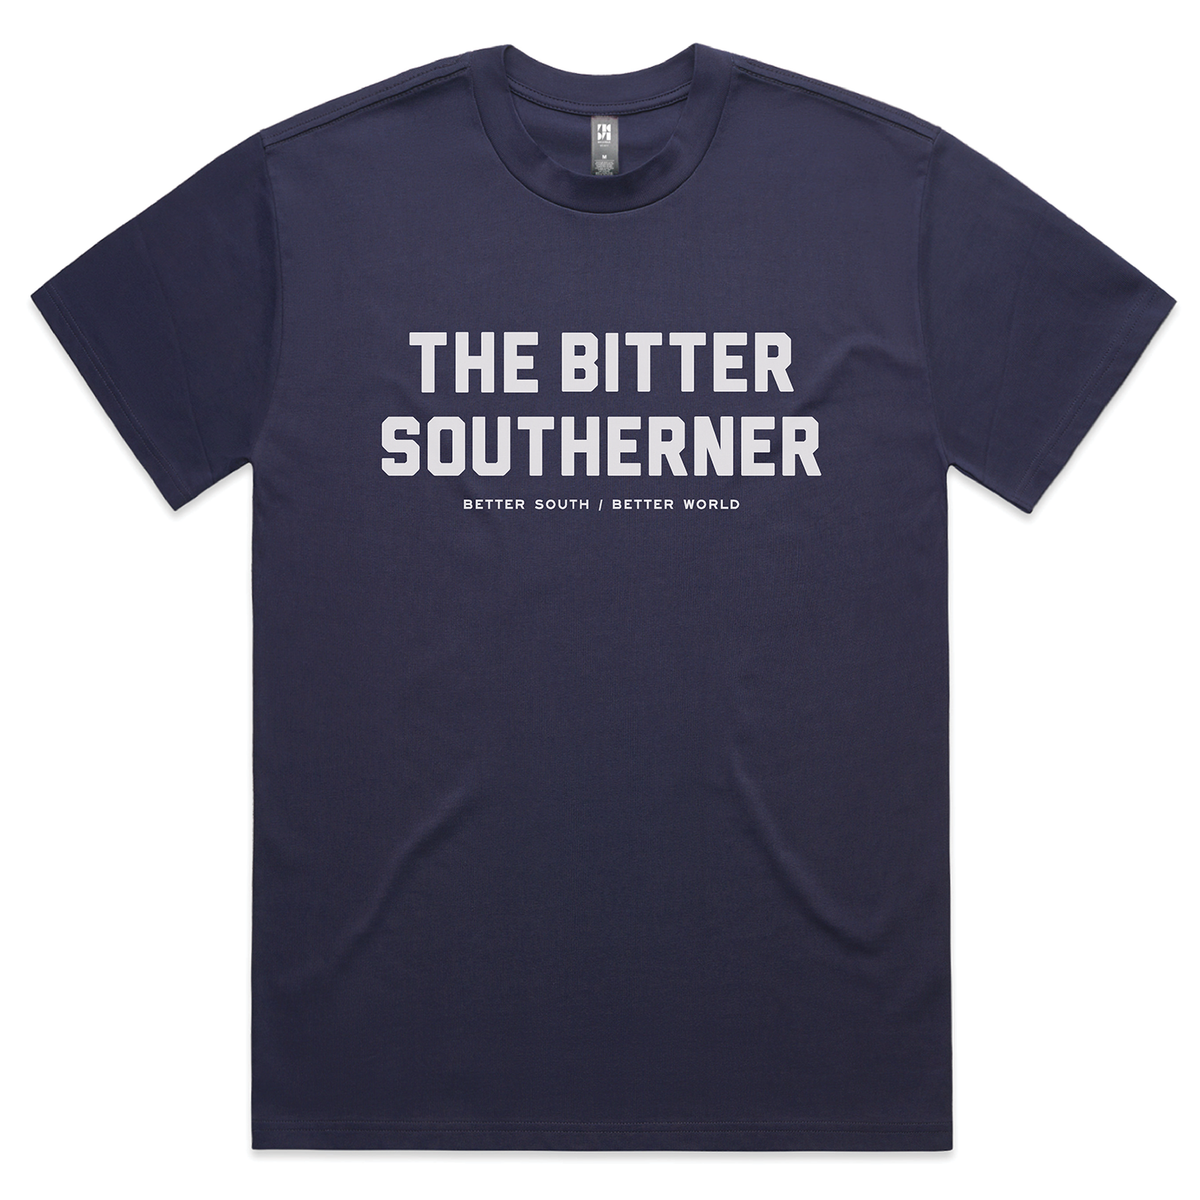 The Bitter Southerner Shirt